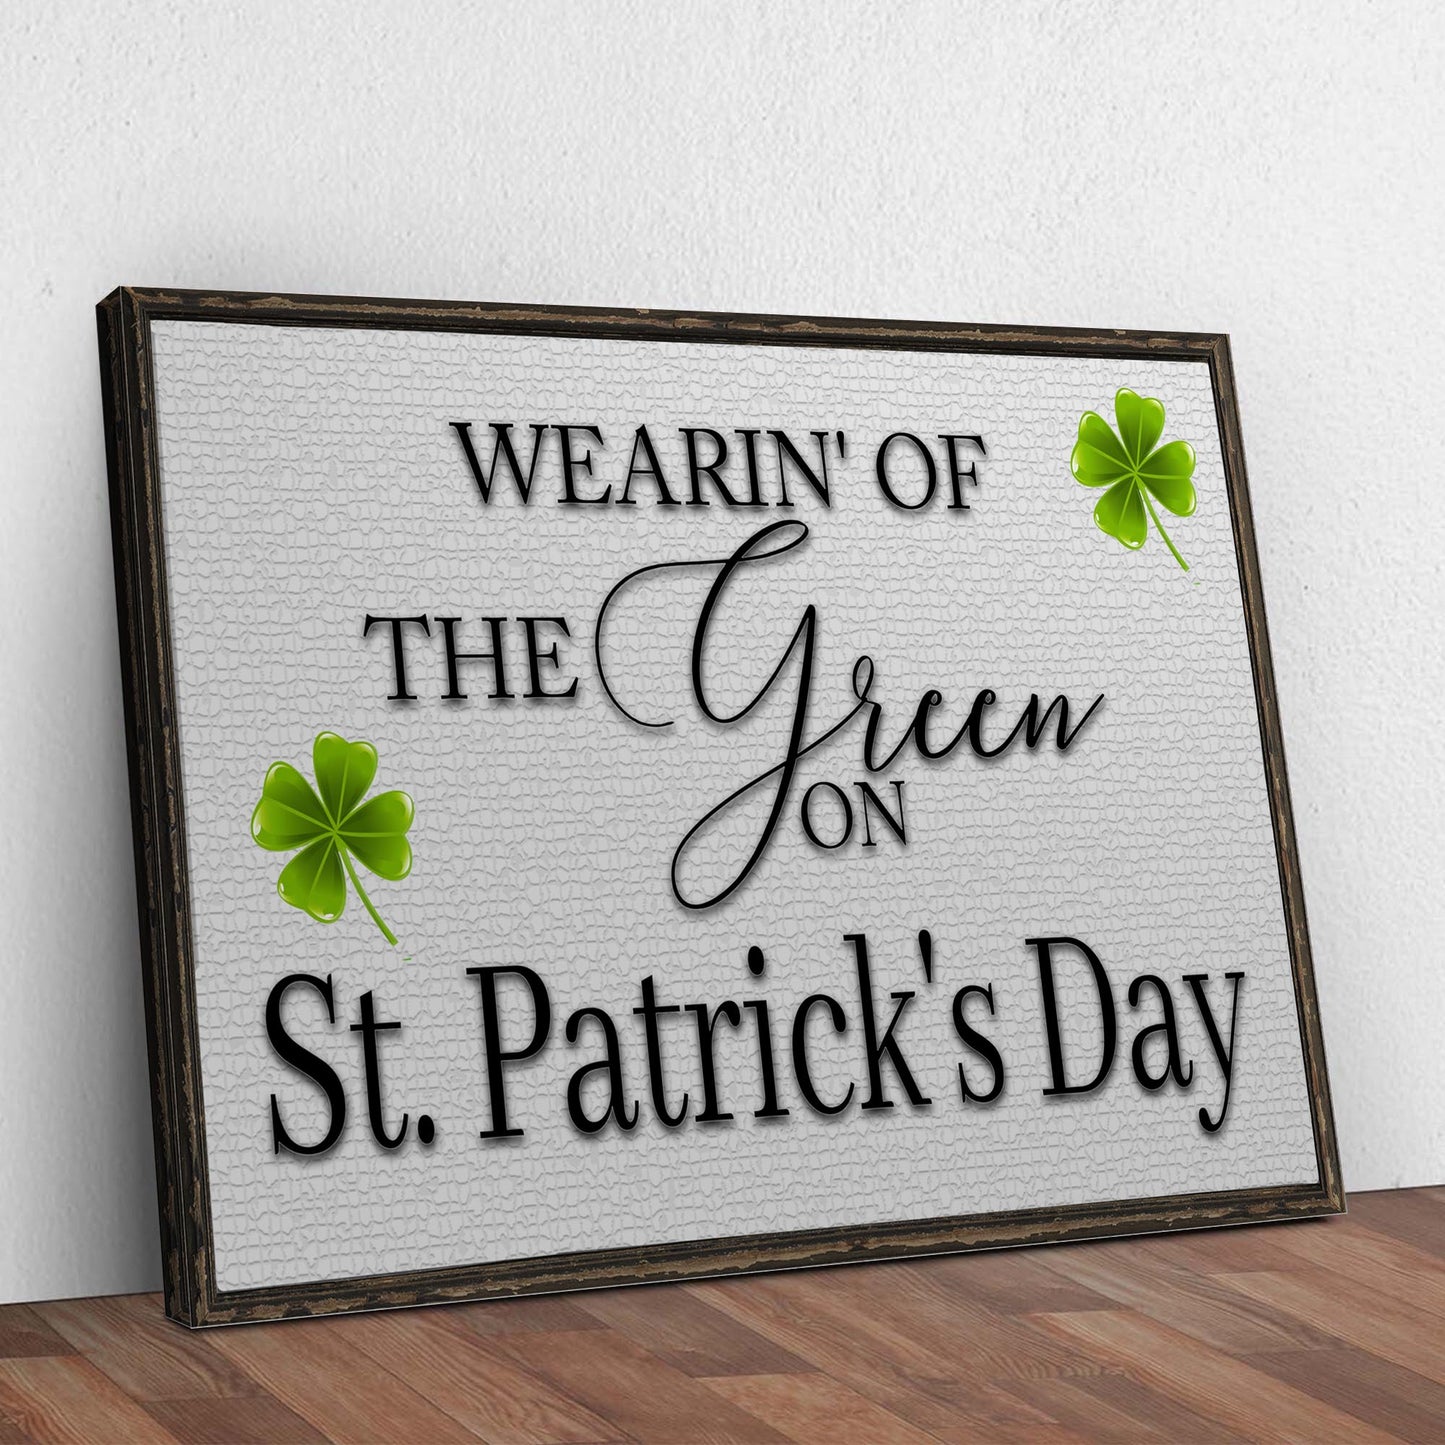 Wearin' Of The Green On St. Patrick's Day Sign Style 2 - Image by Tailored Canvases